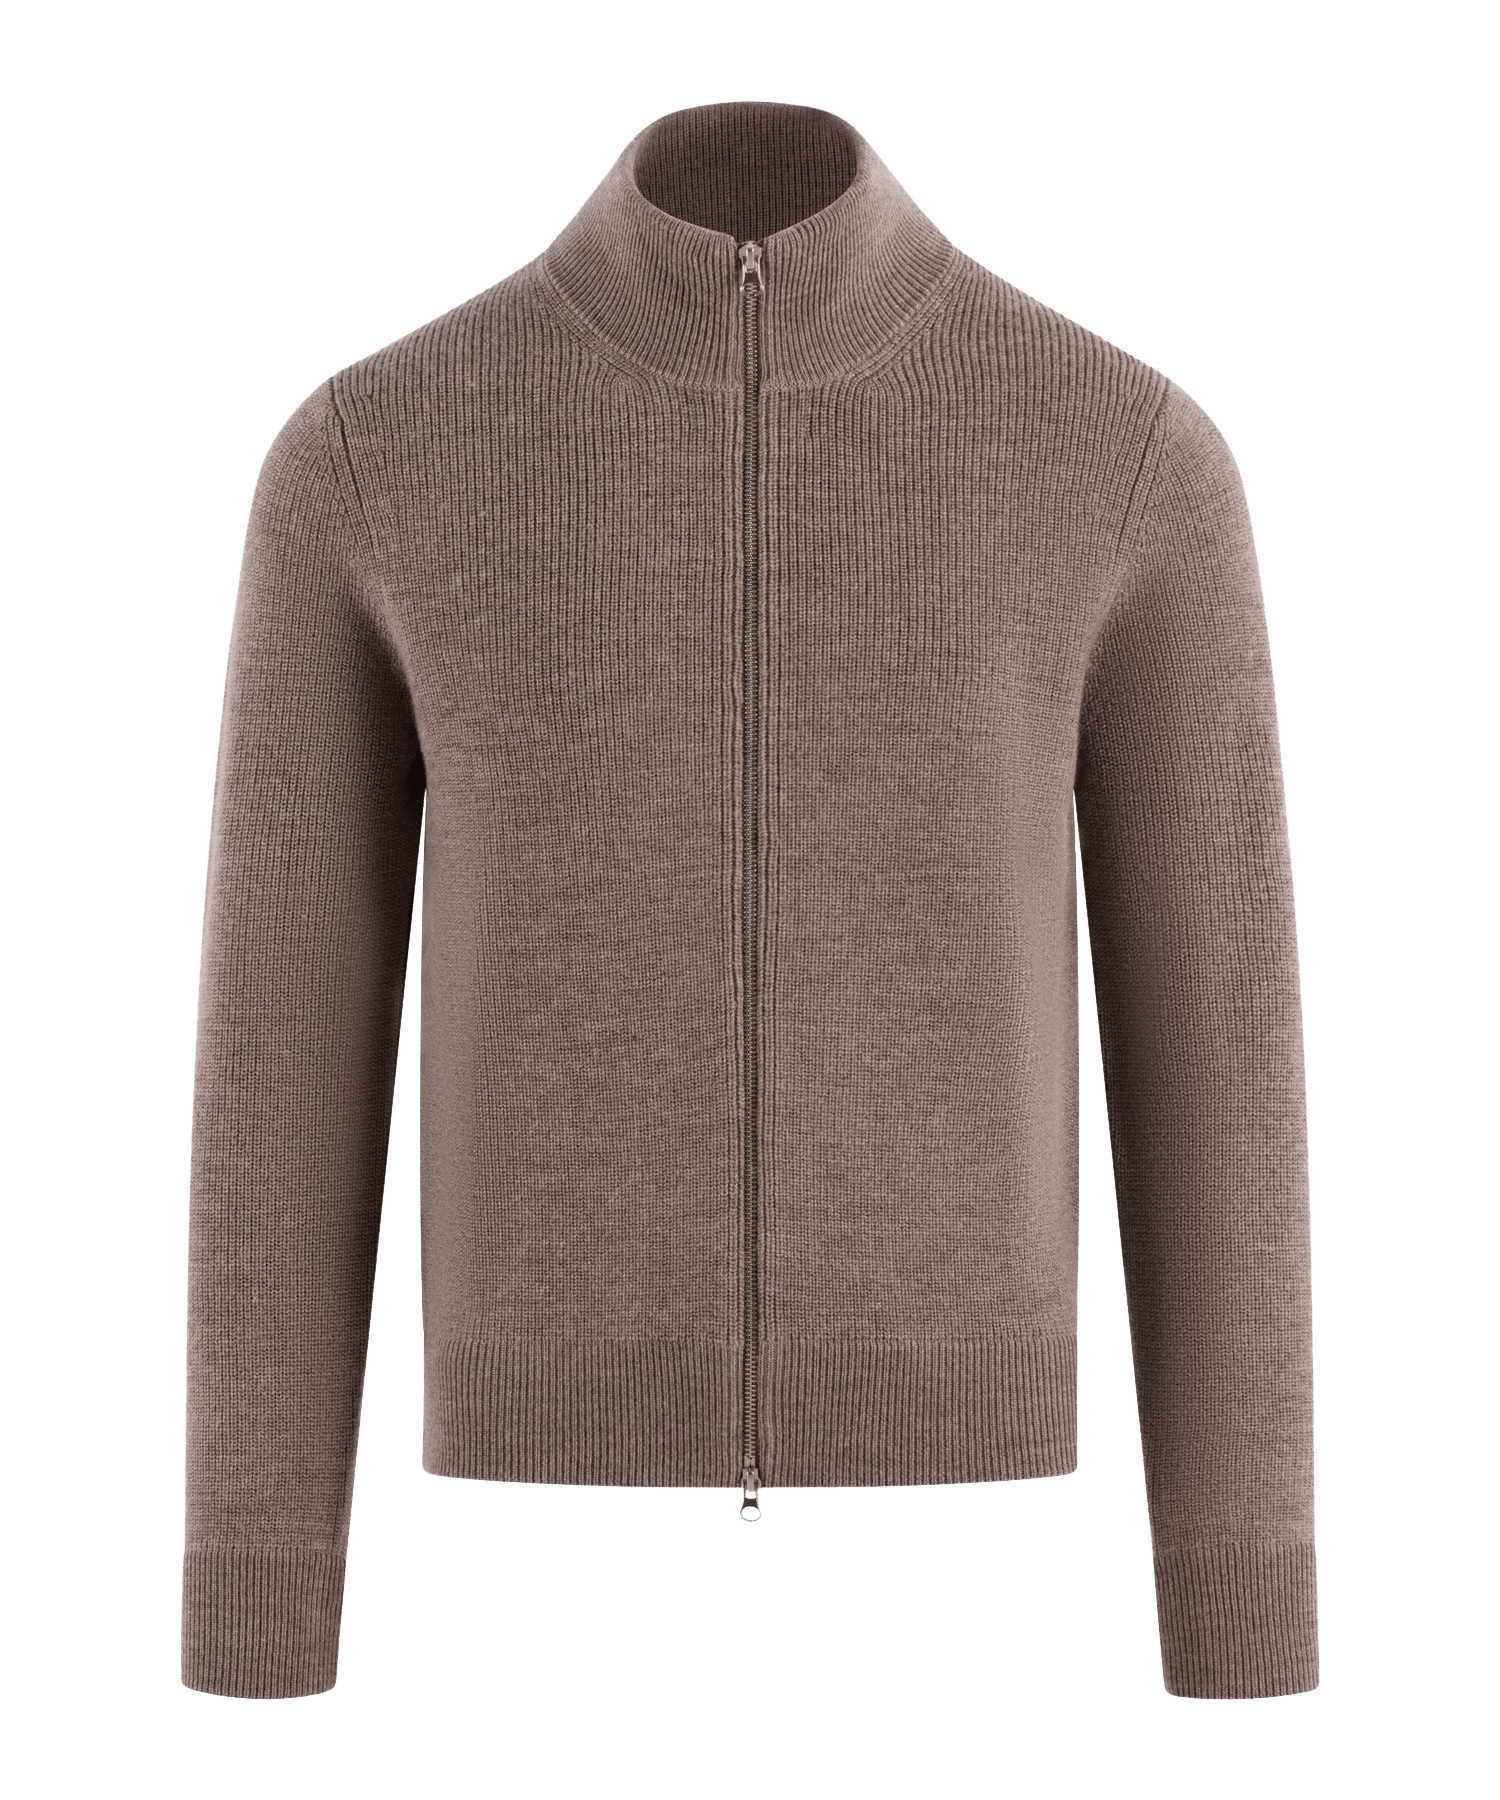 VEST EXTRAFINE WO L / Beige / taupe